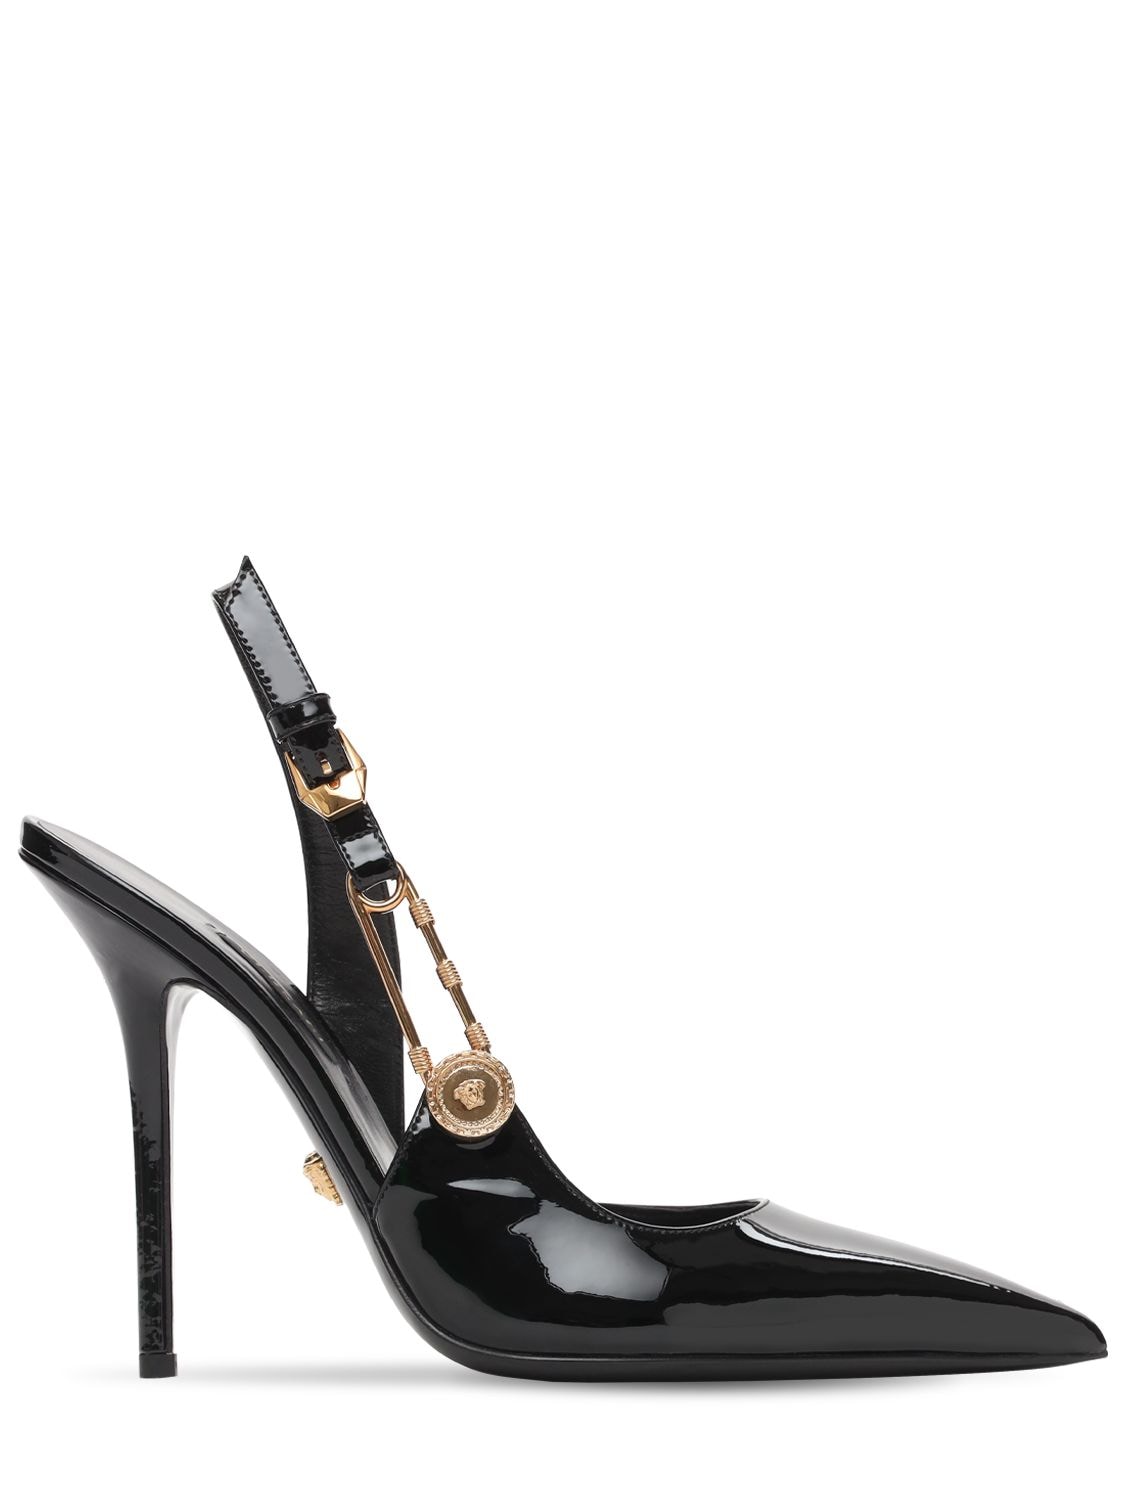 Versace Black 110 Safety Pin Patent Leather Pumps | ModeSens